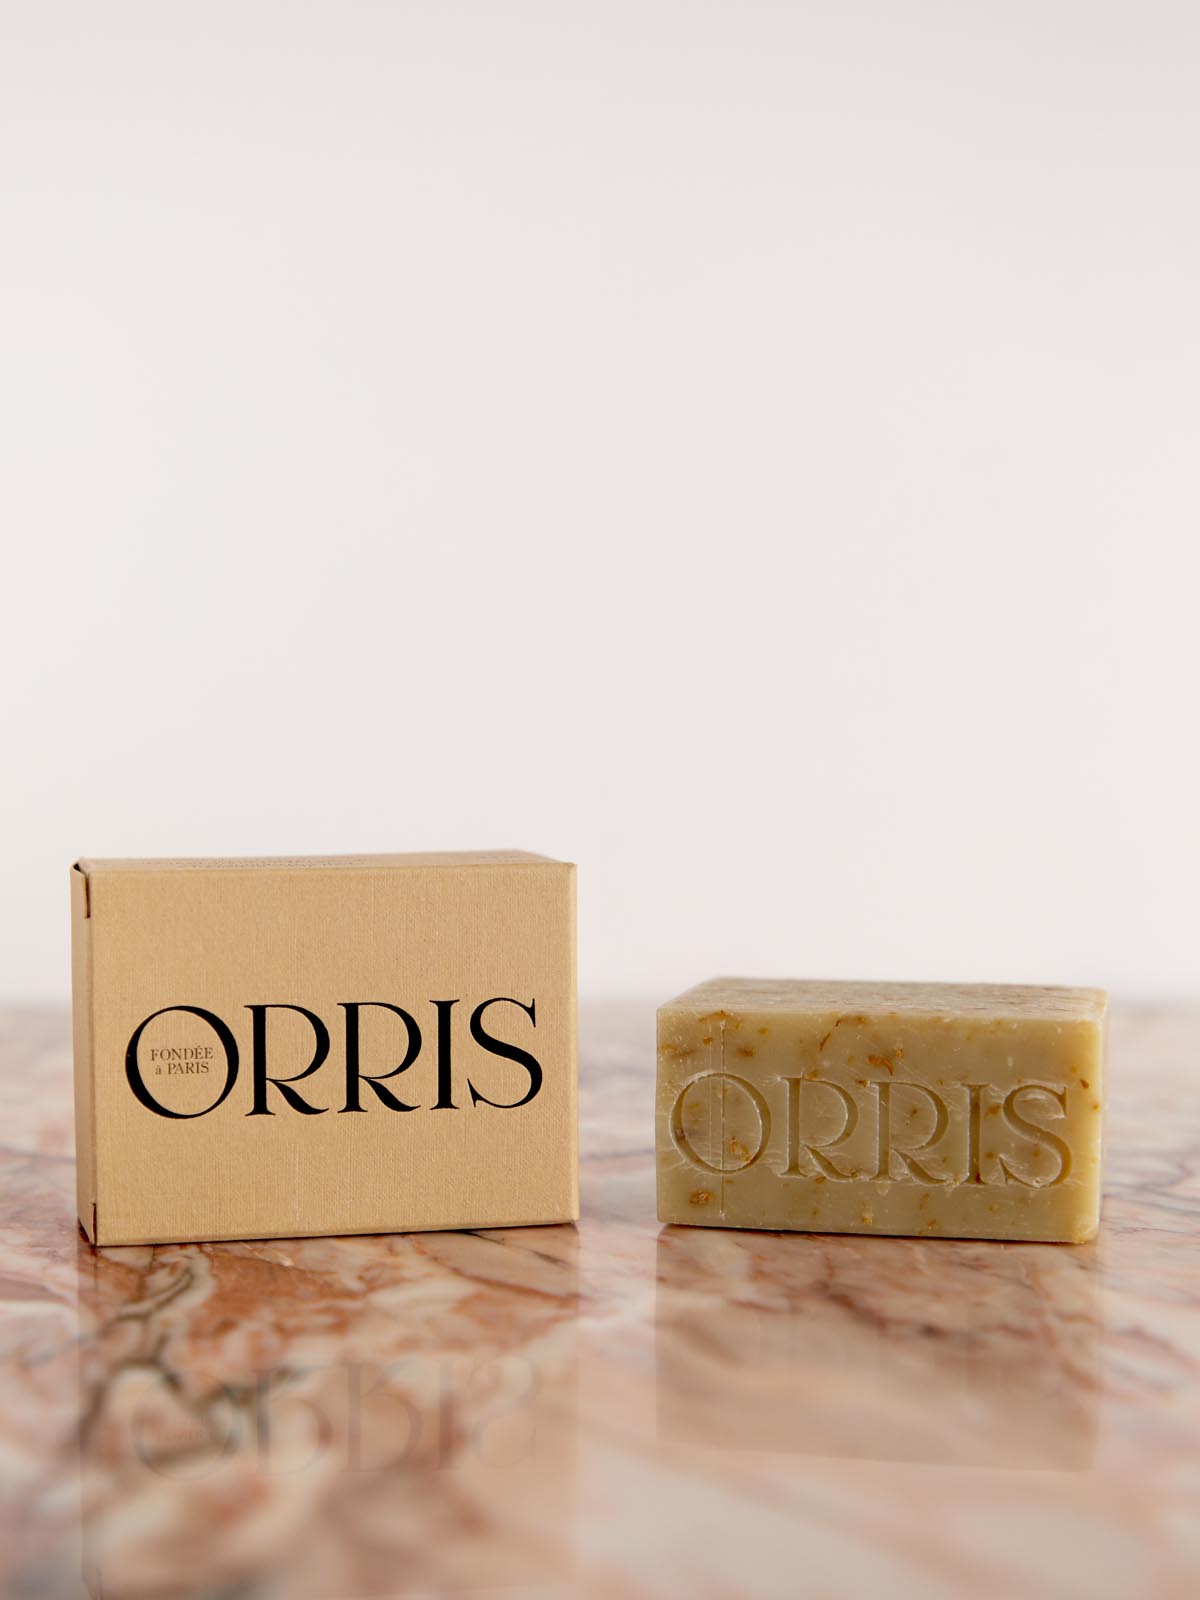 Le Botaniste - Cleansing Bar by Orris box and soap on pink marble